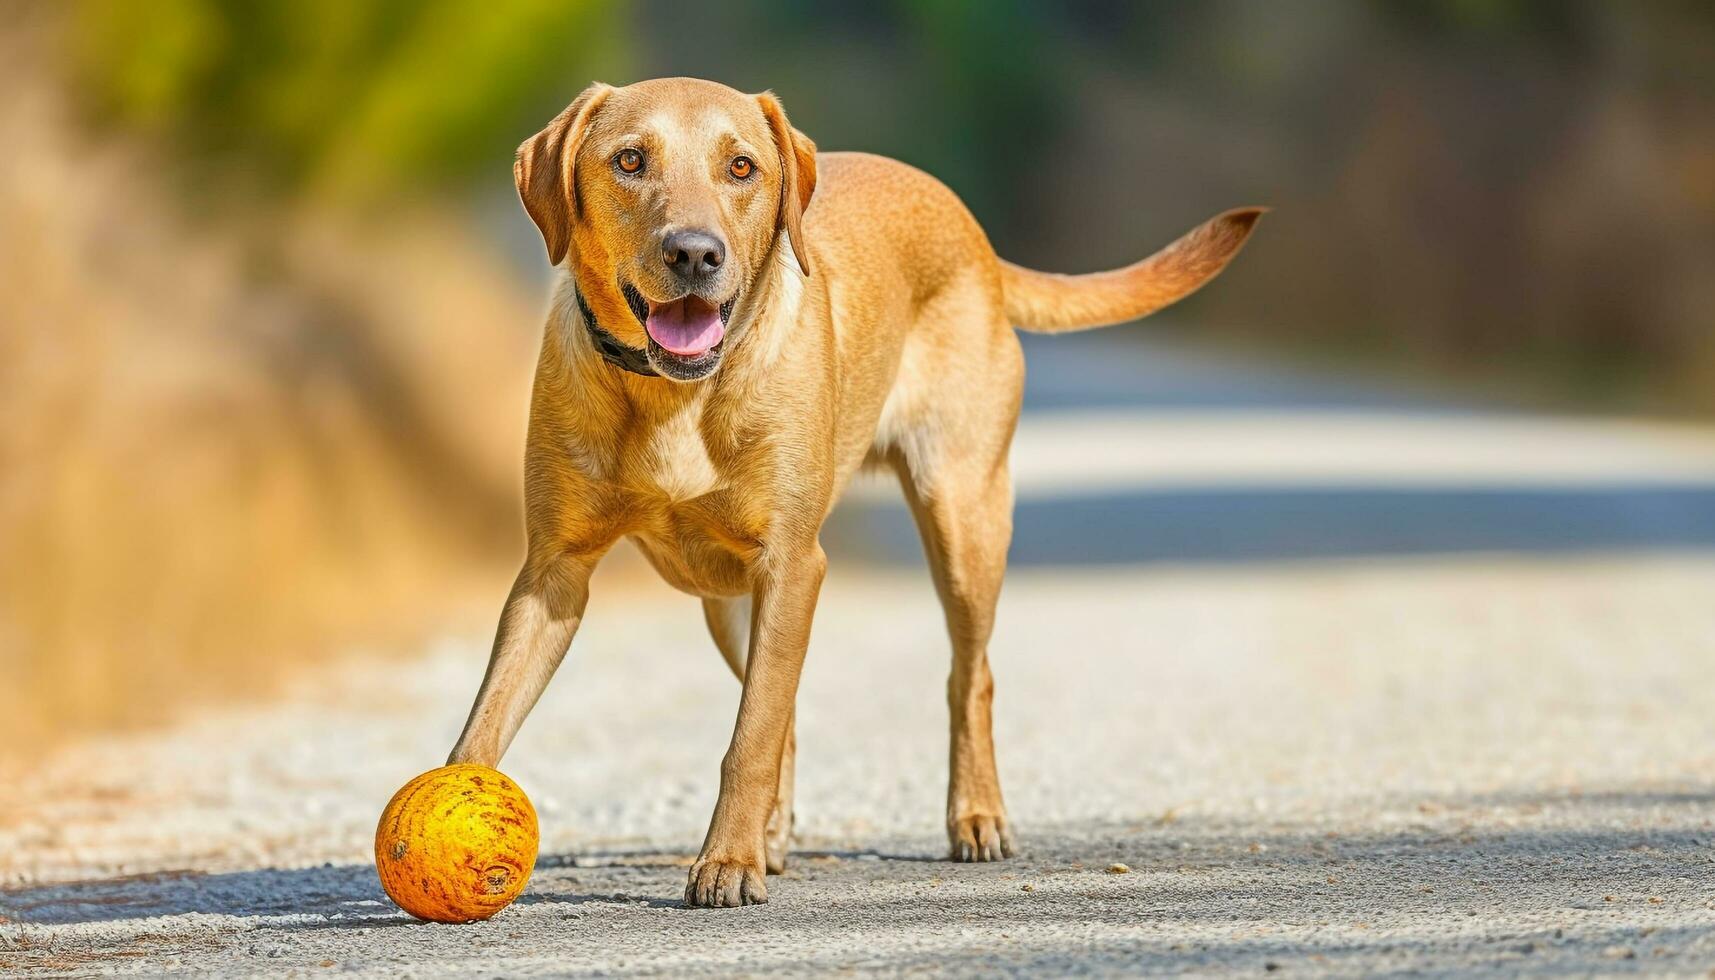 Cute purebred puppy playing with ball outdoors, looking at camera generated by AI photo